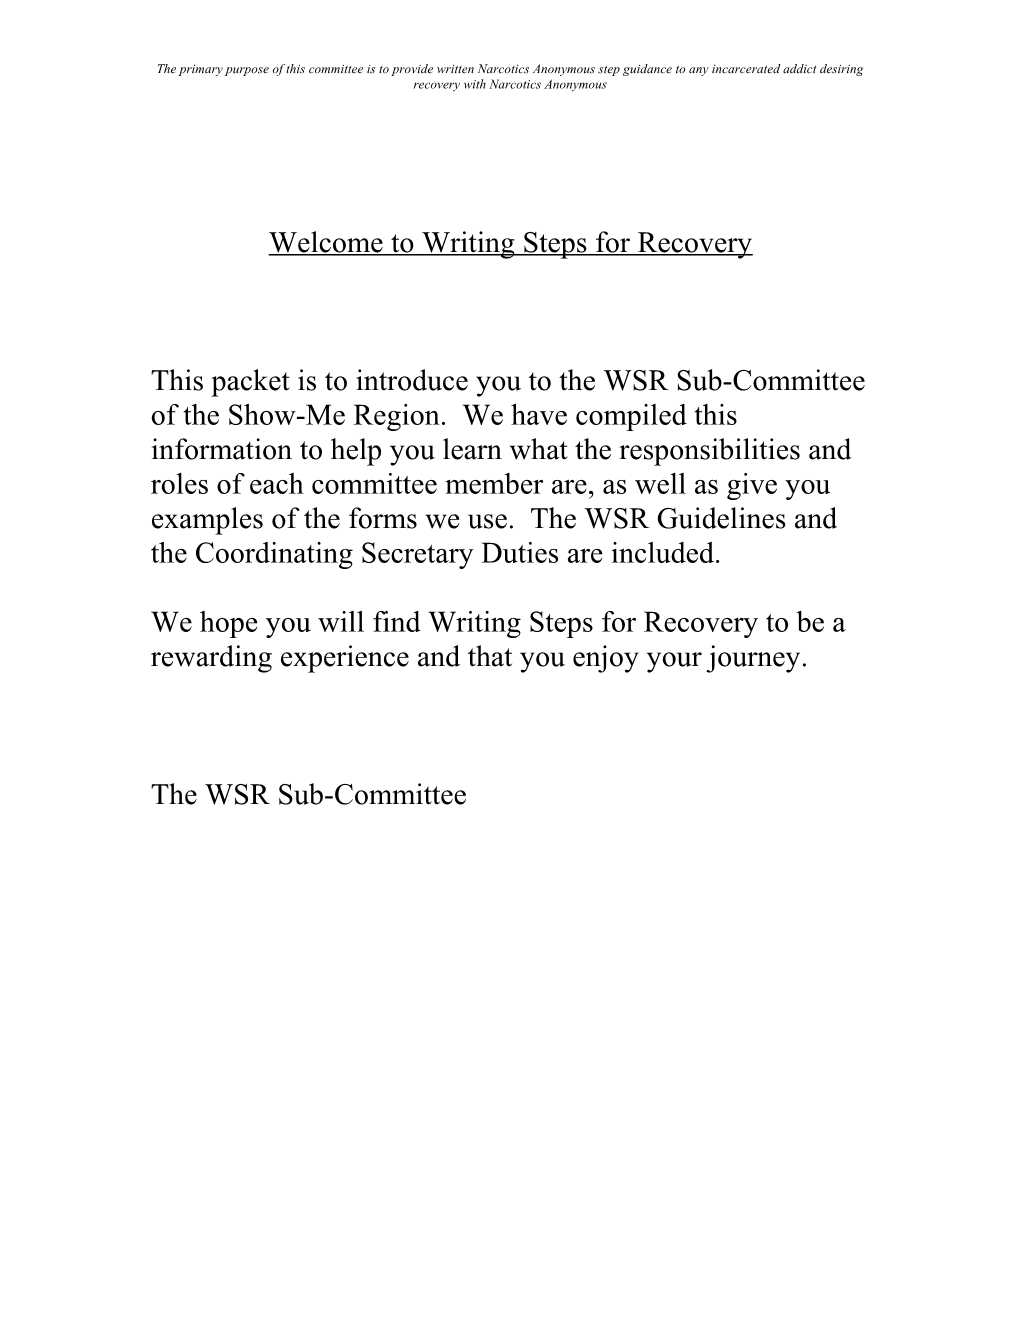 Welcome to Writing Steps for Recovery